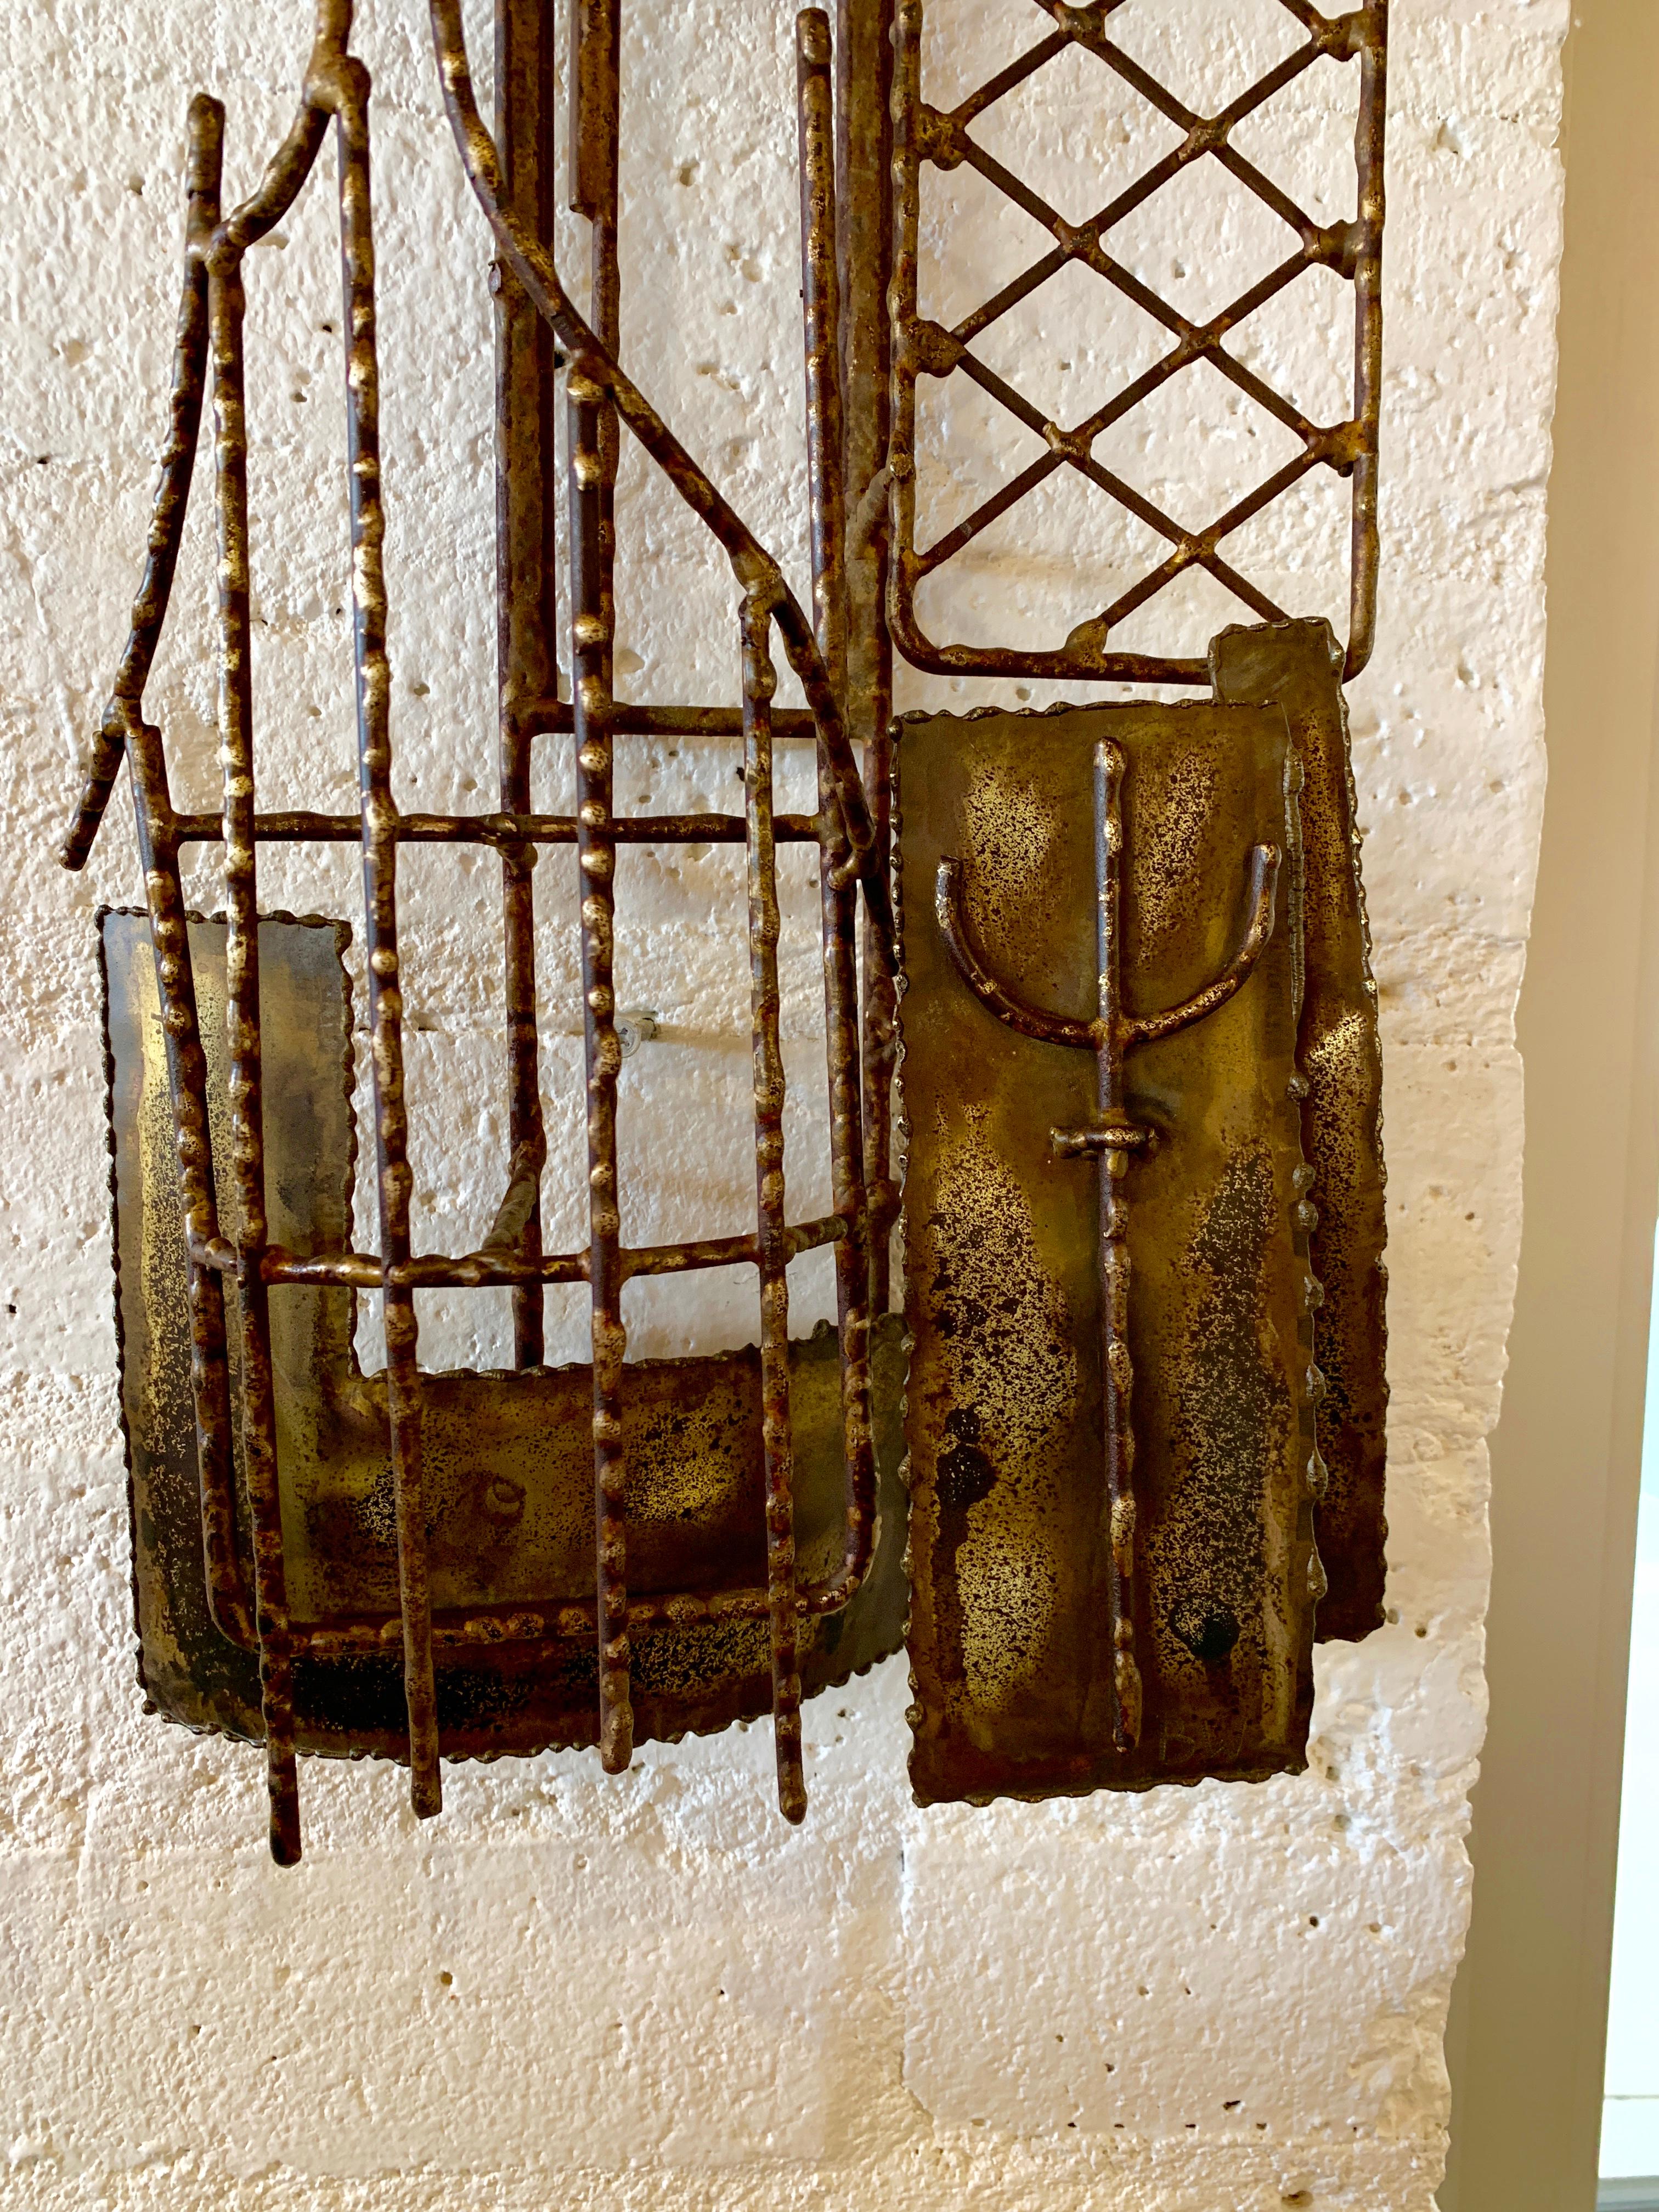 A vintage brutalist wall sculpture in iron and brass. Monogrammed BW on the front bottom right. The sculpture has been cleaned up and re-lacquered. It still has age appropriate wear and imperfections.